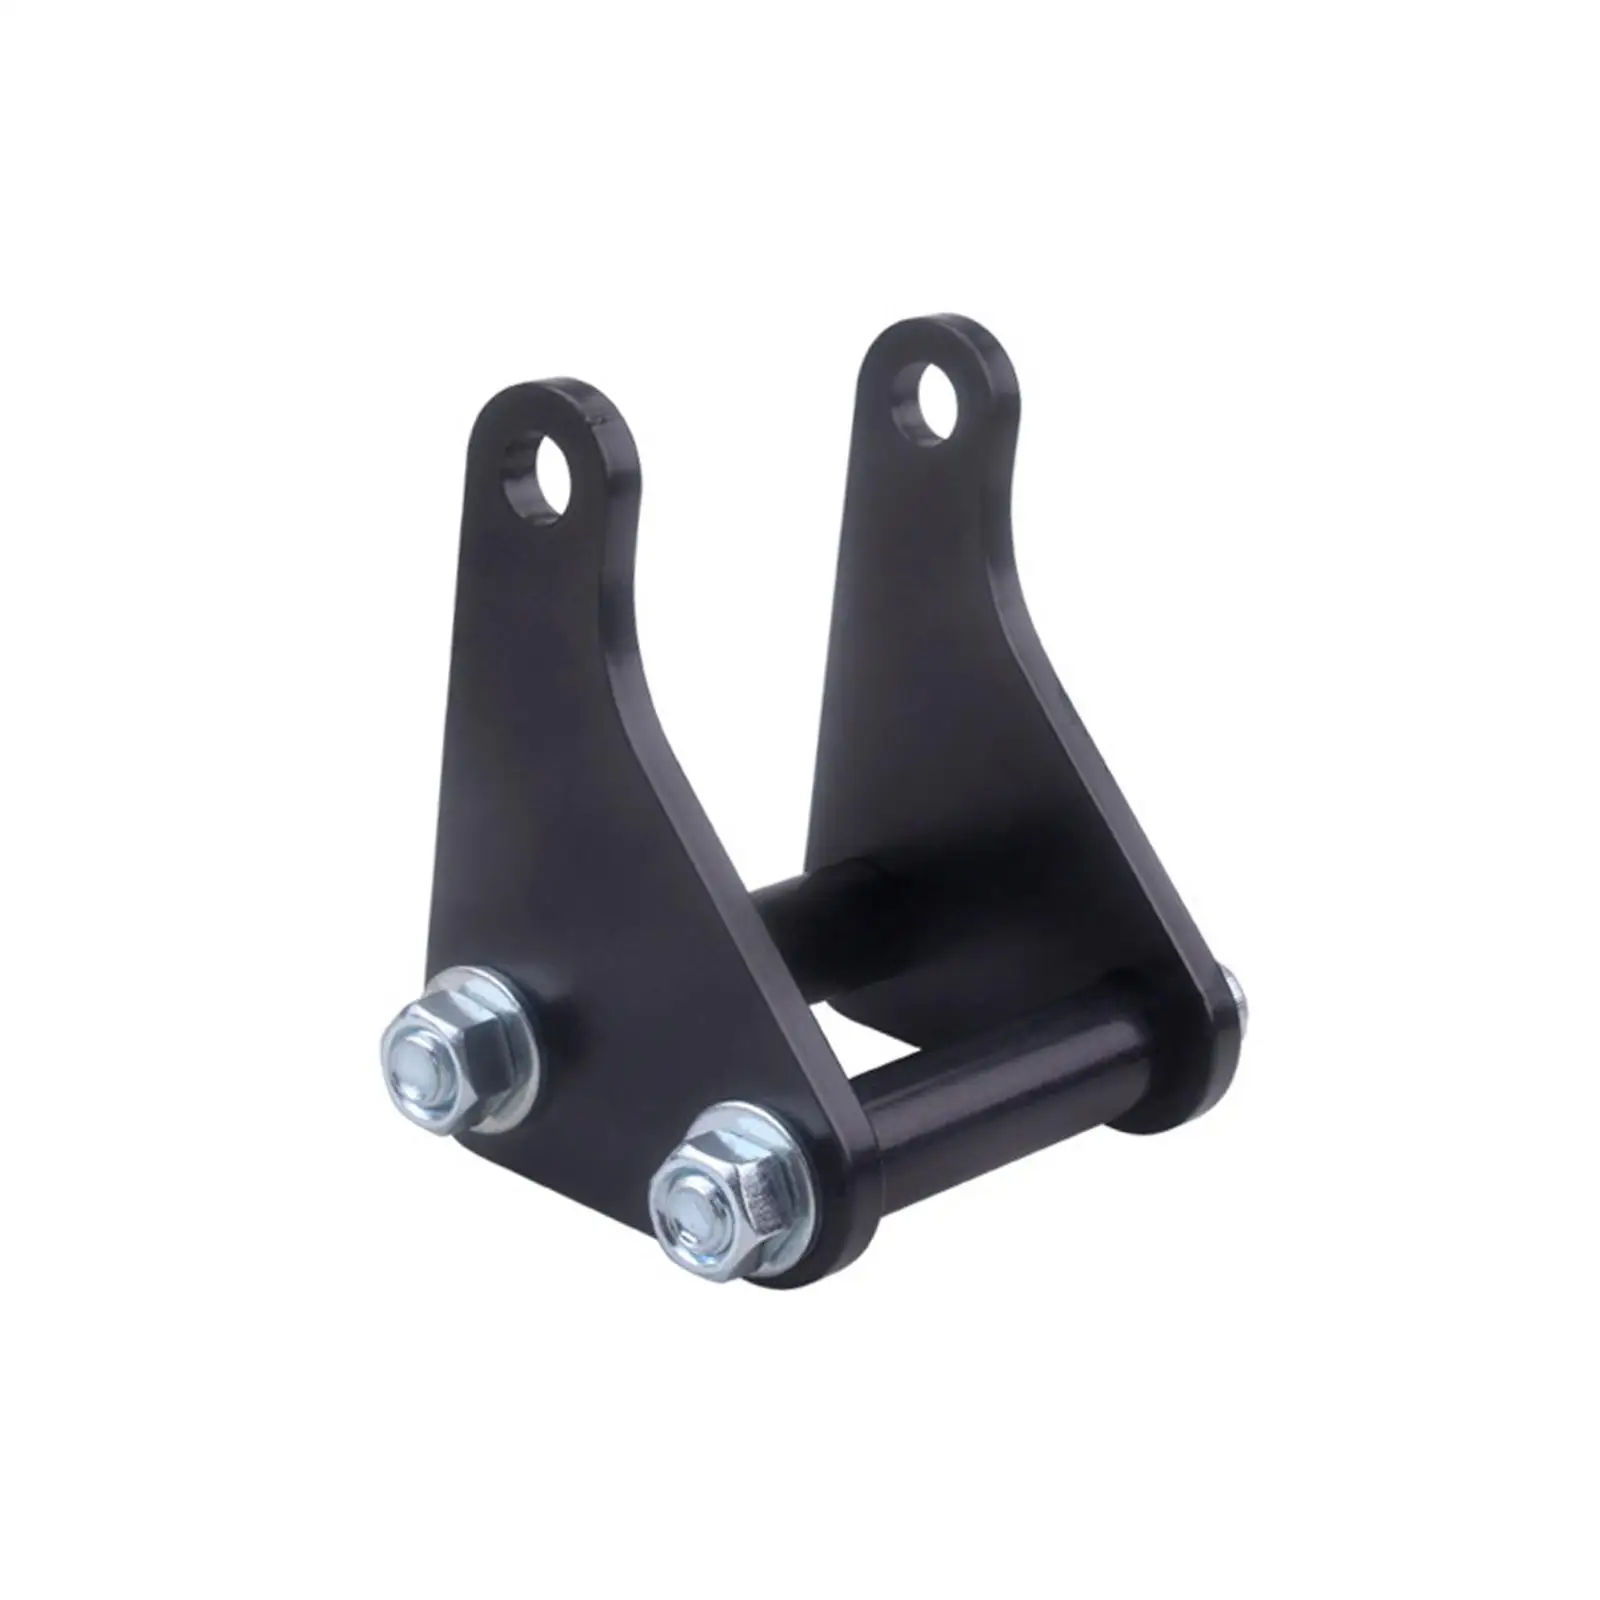 Black Power Steering Pump Mounting Bracket Easy Installation Professional Accessory for Chevy Sbc Engine 283 305 383 400